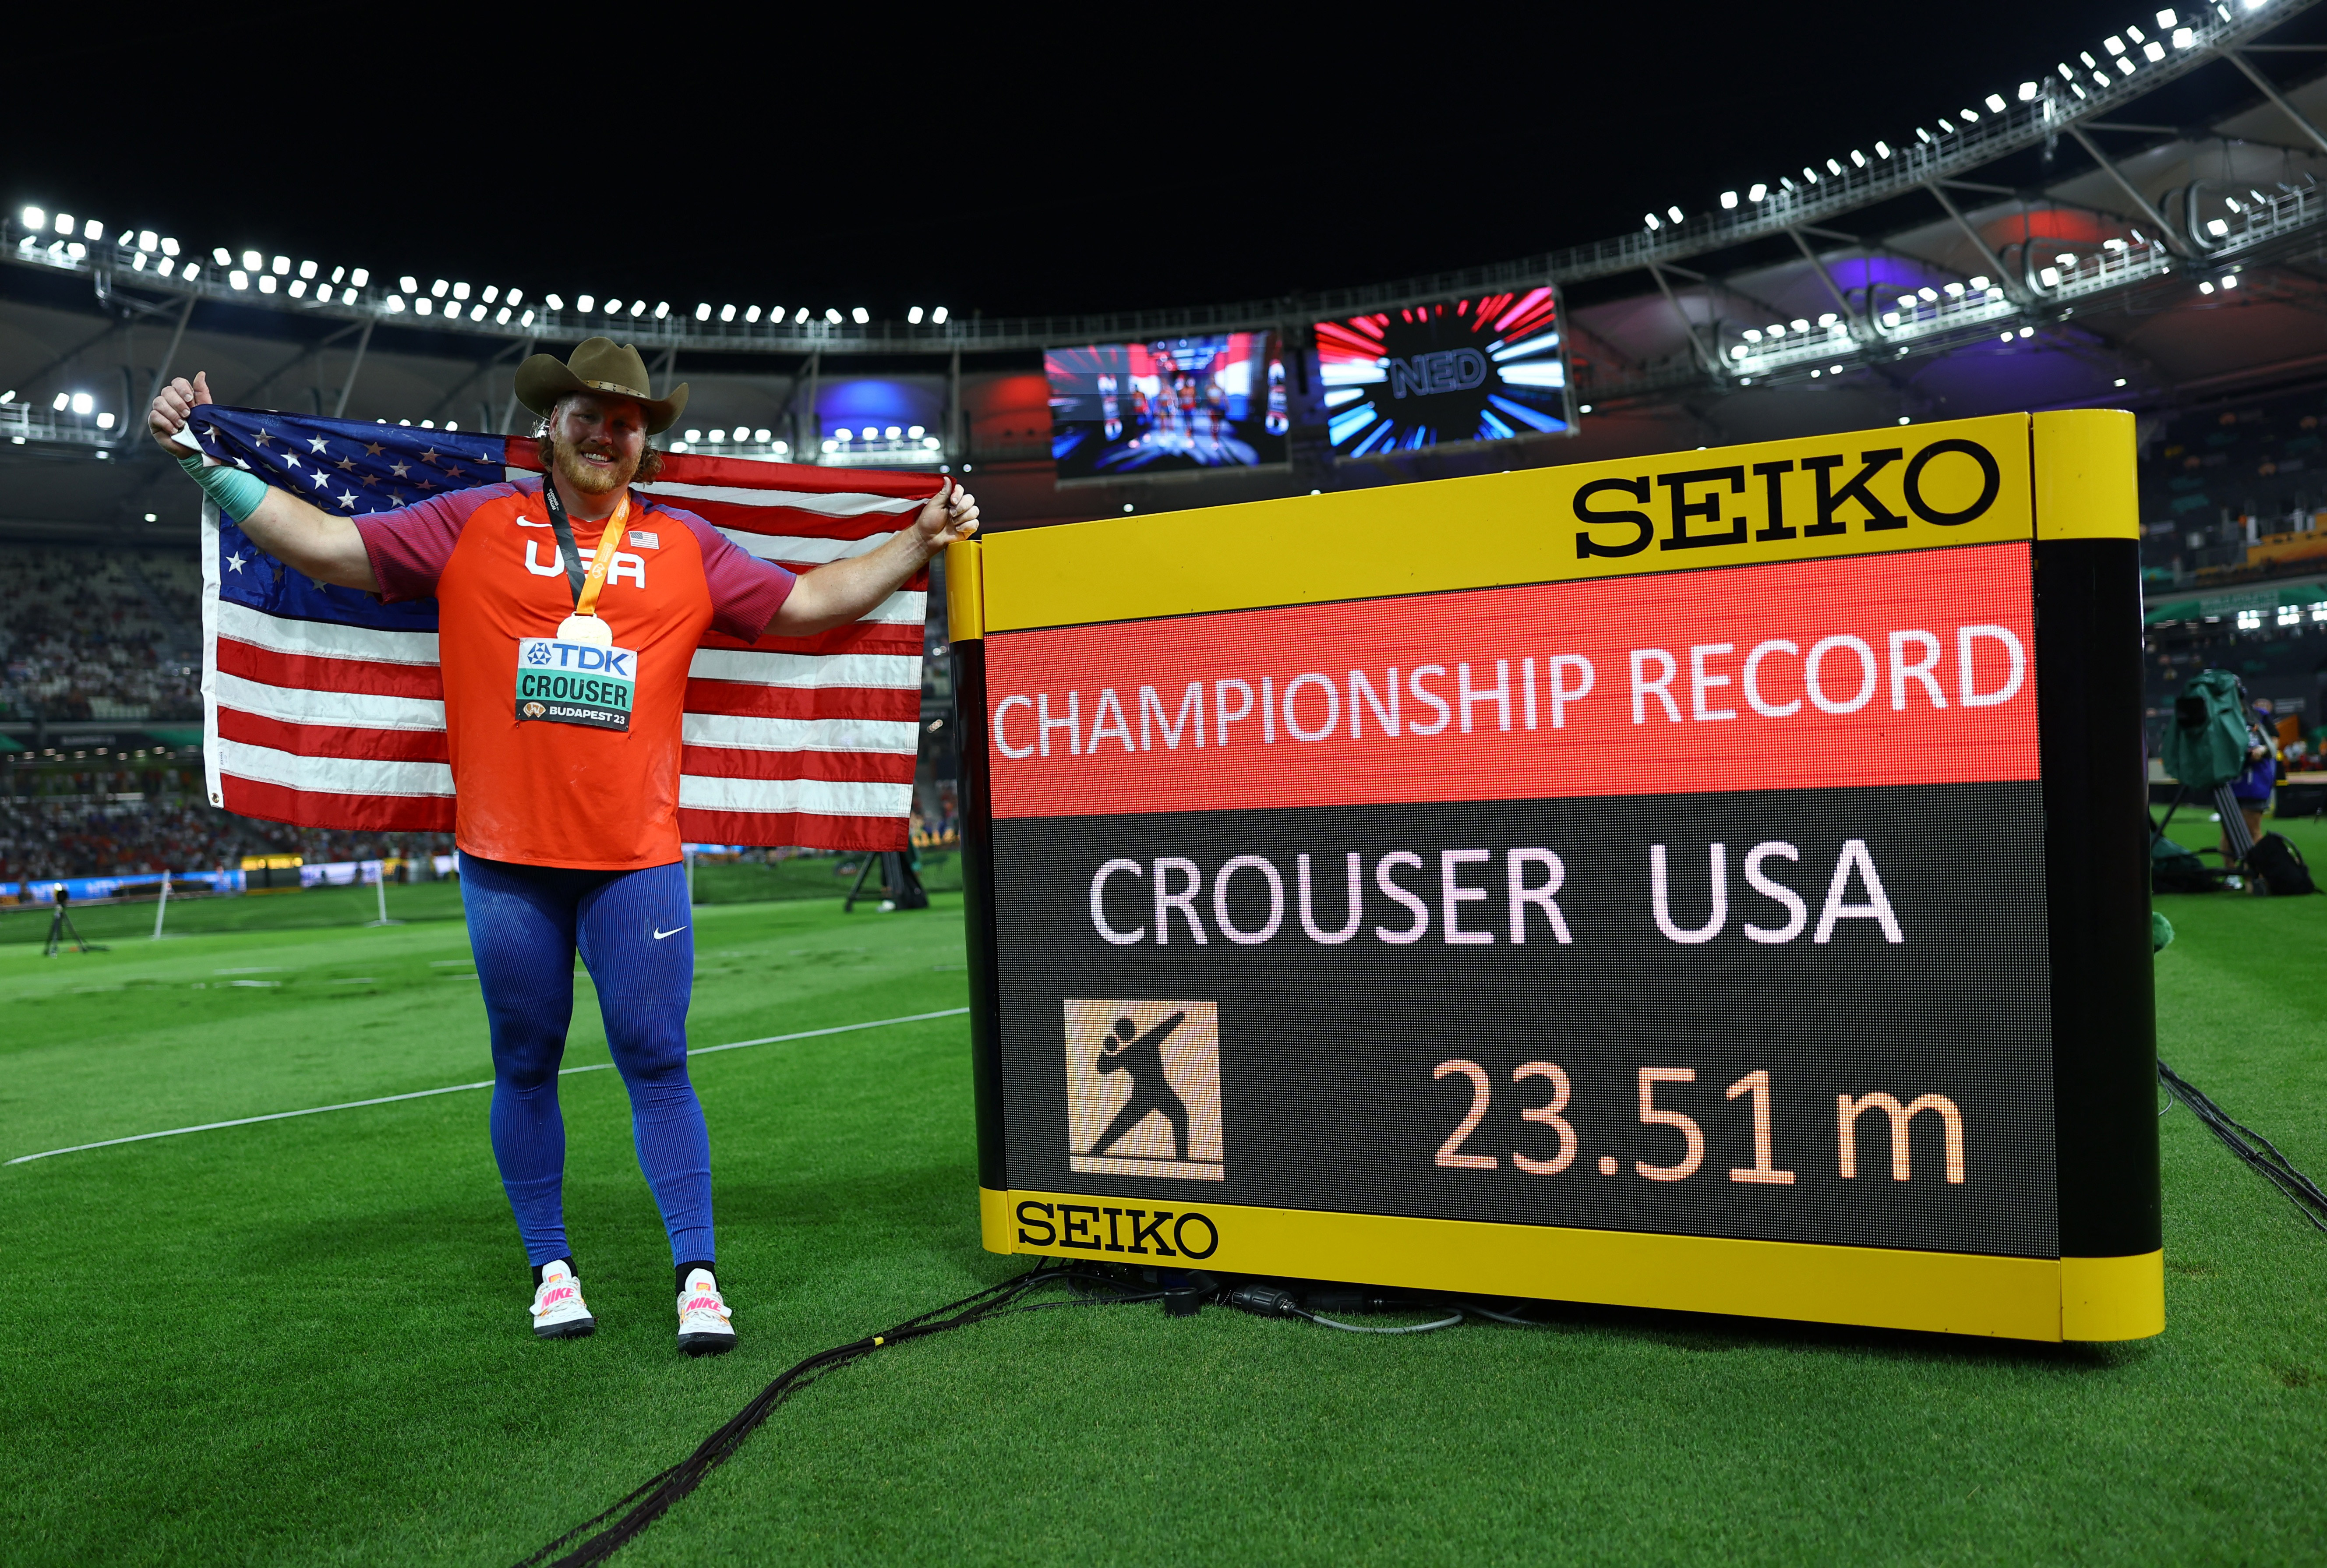 Japanese technology firm Seiko is behind the technology being used to measure the physical feats of the world's greatest athletes at this summer's World Athletic Championships in Budapest. /Fabrizio Bensch/Reuters